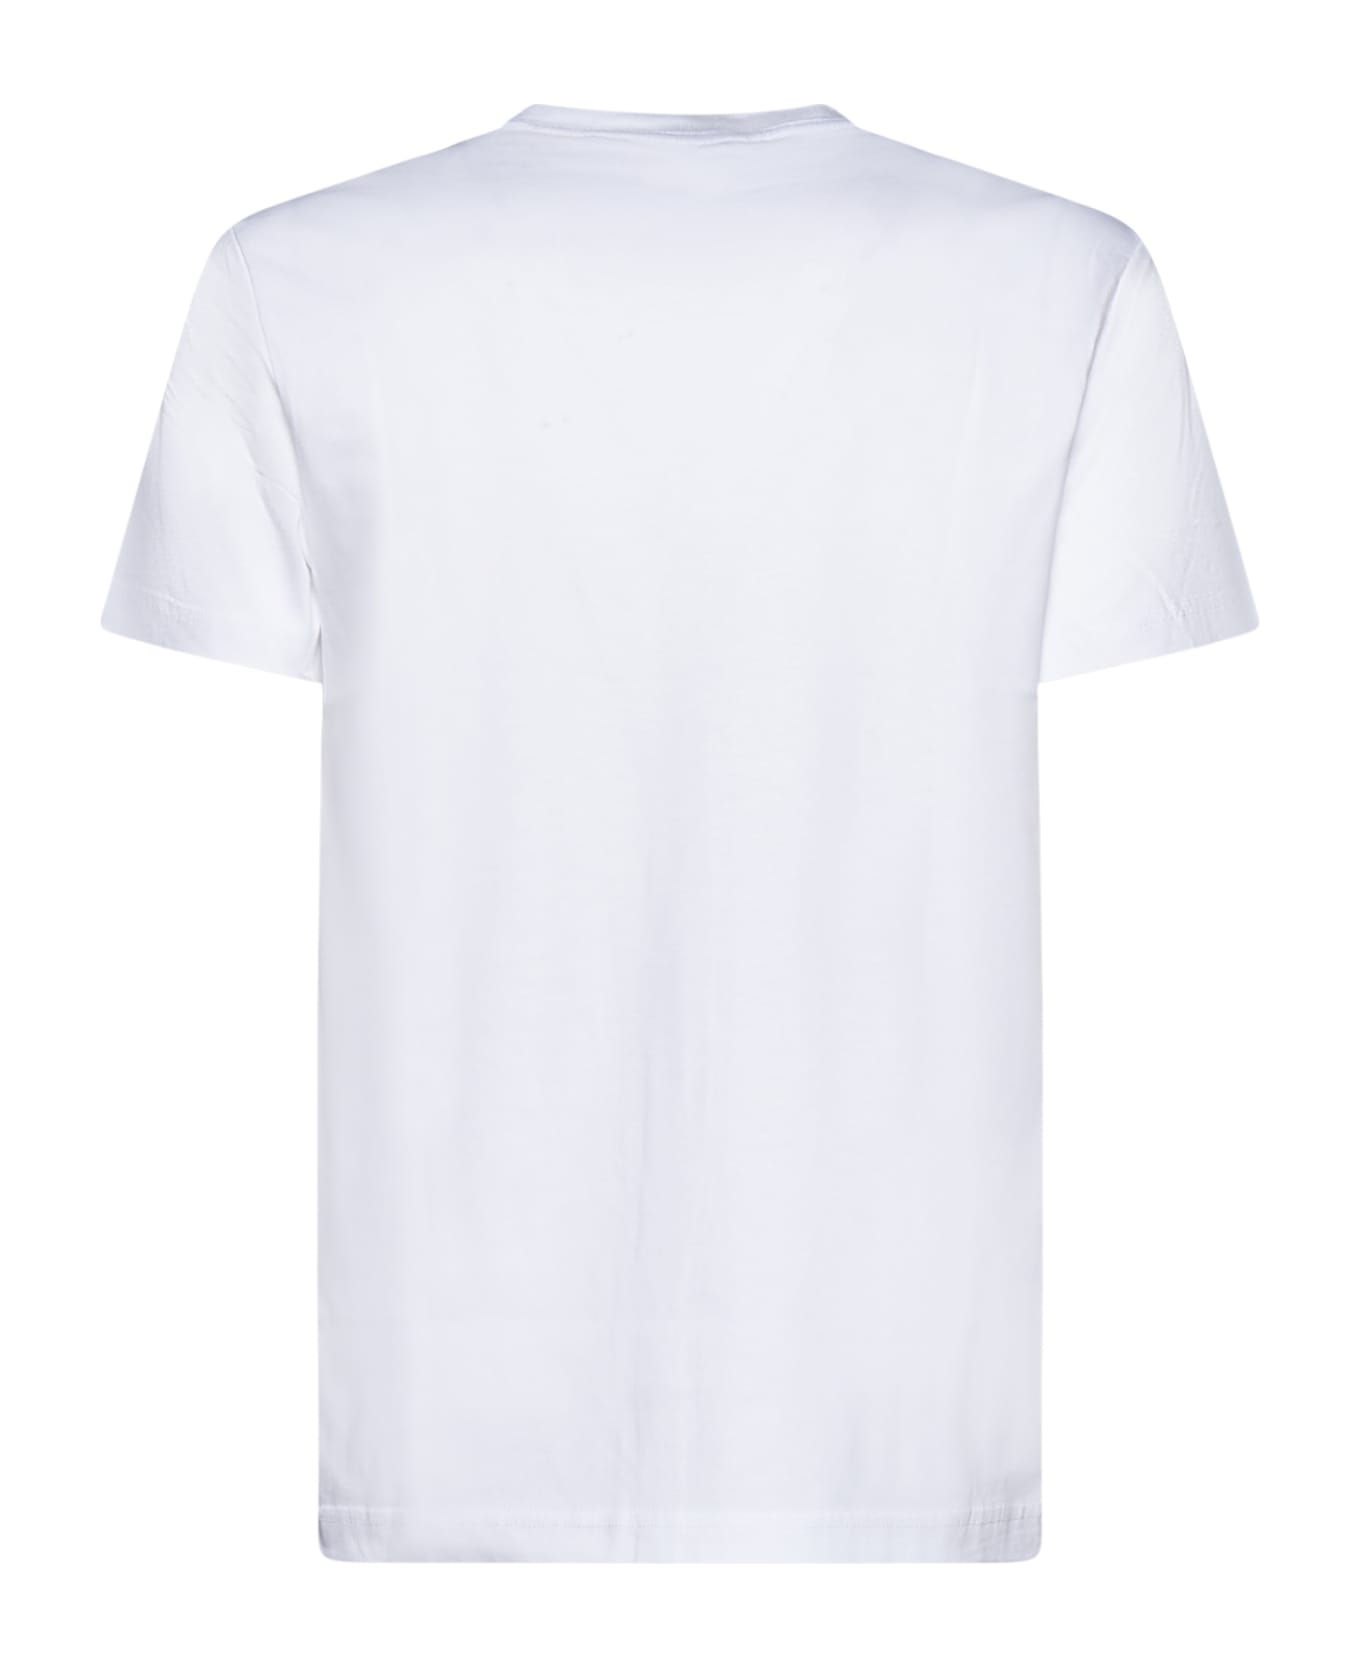 Versace Jeans Couture Logoed T-shirt - White Gold